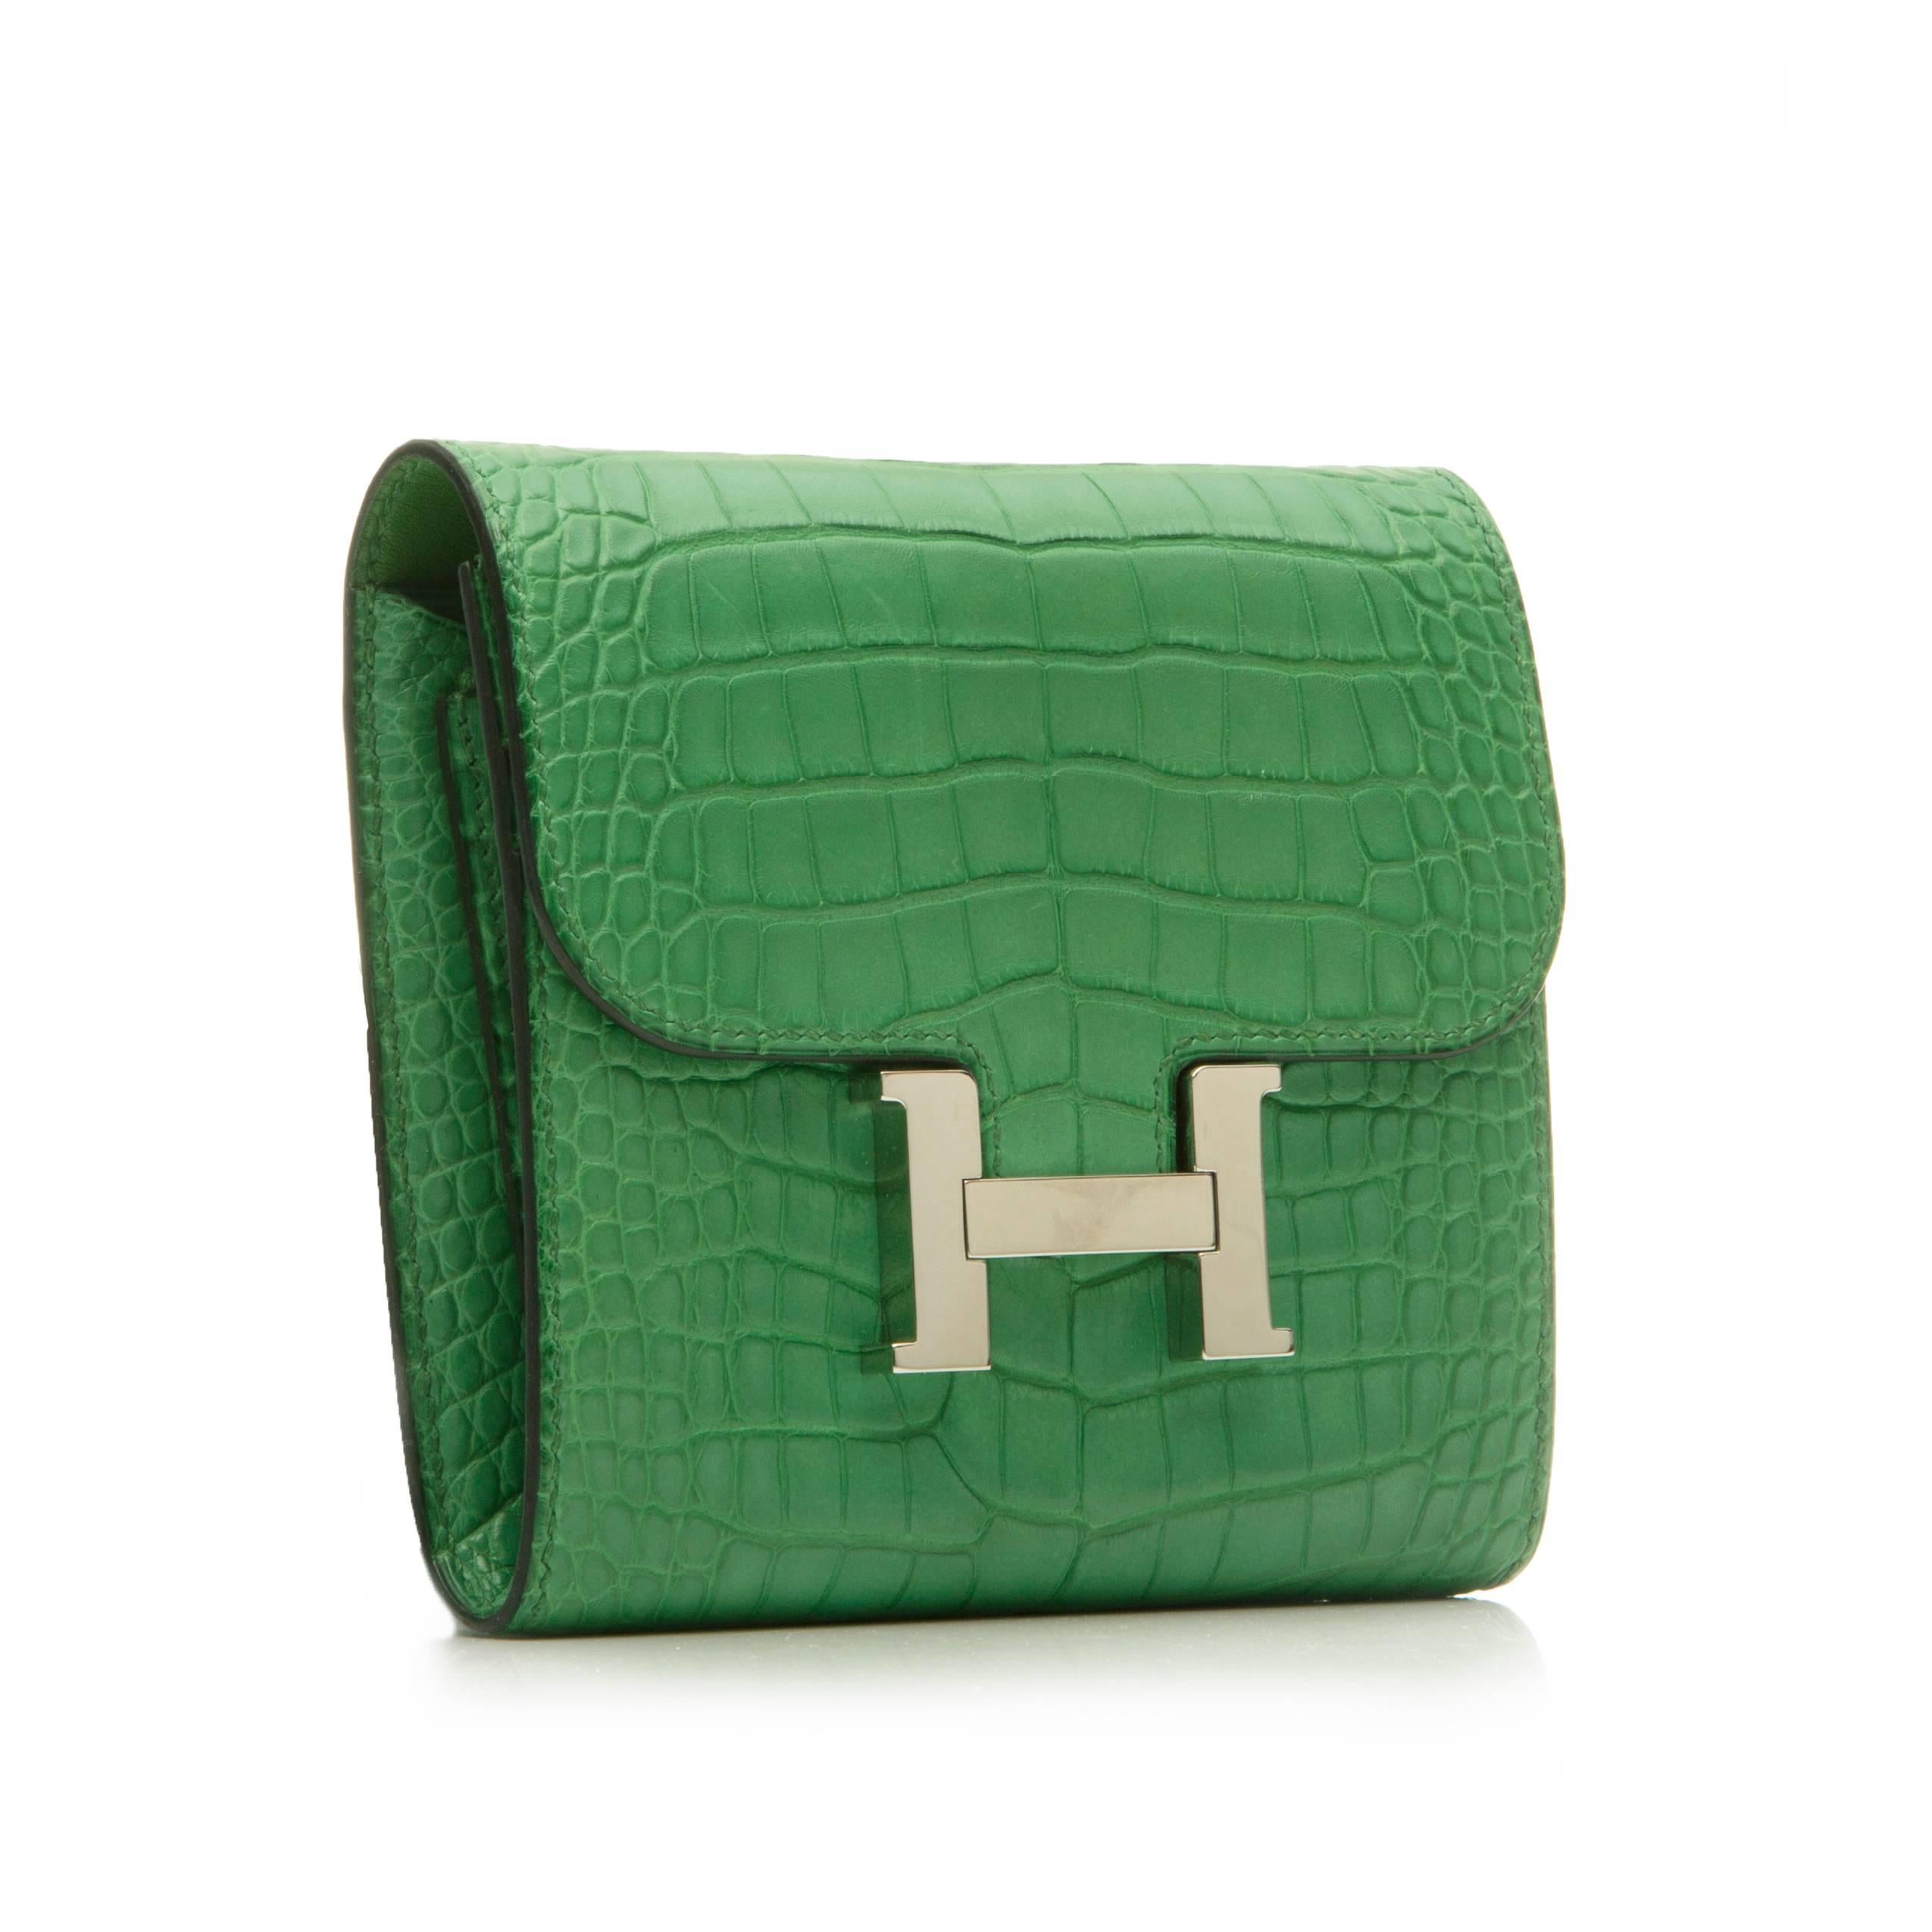 A bold design for organising monetary essentials, this Hermès Constance wallet is crafted in a Cactus green alligator skin offset with silver-plated palladium hardware. Featuring the iconic Hermès Constance logo fastening, a back slip pocket,